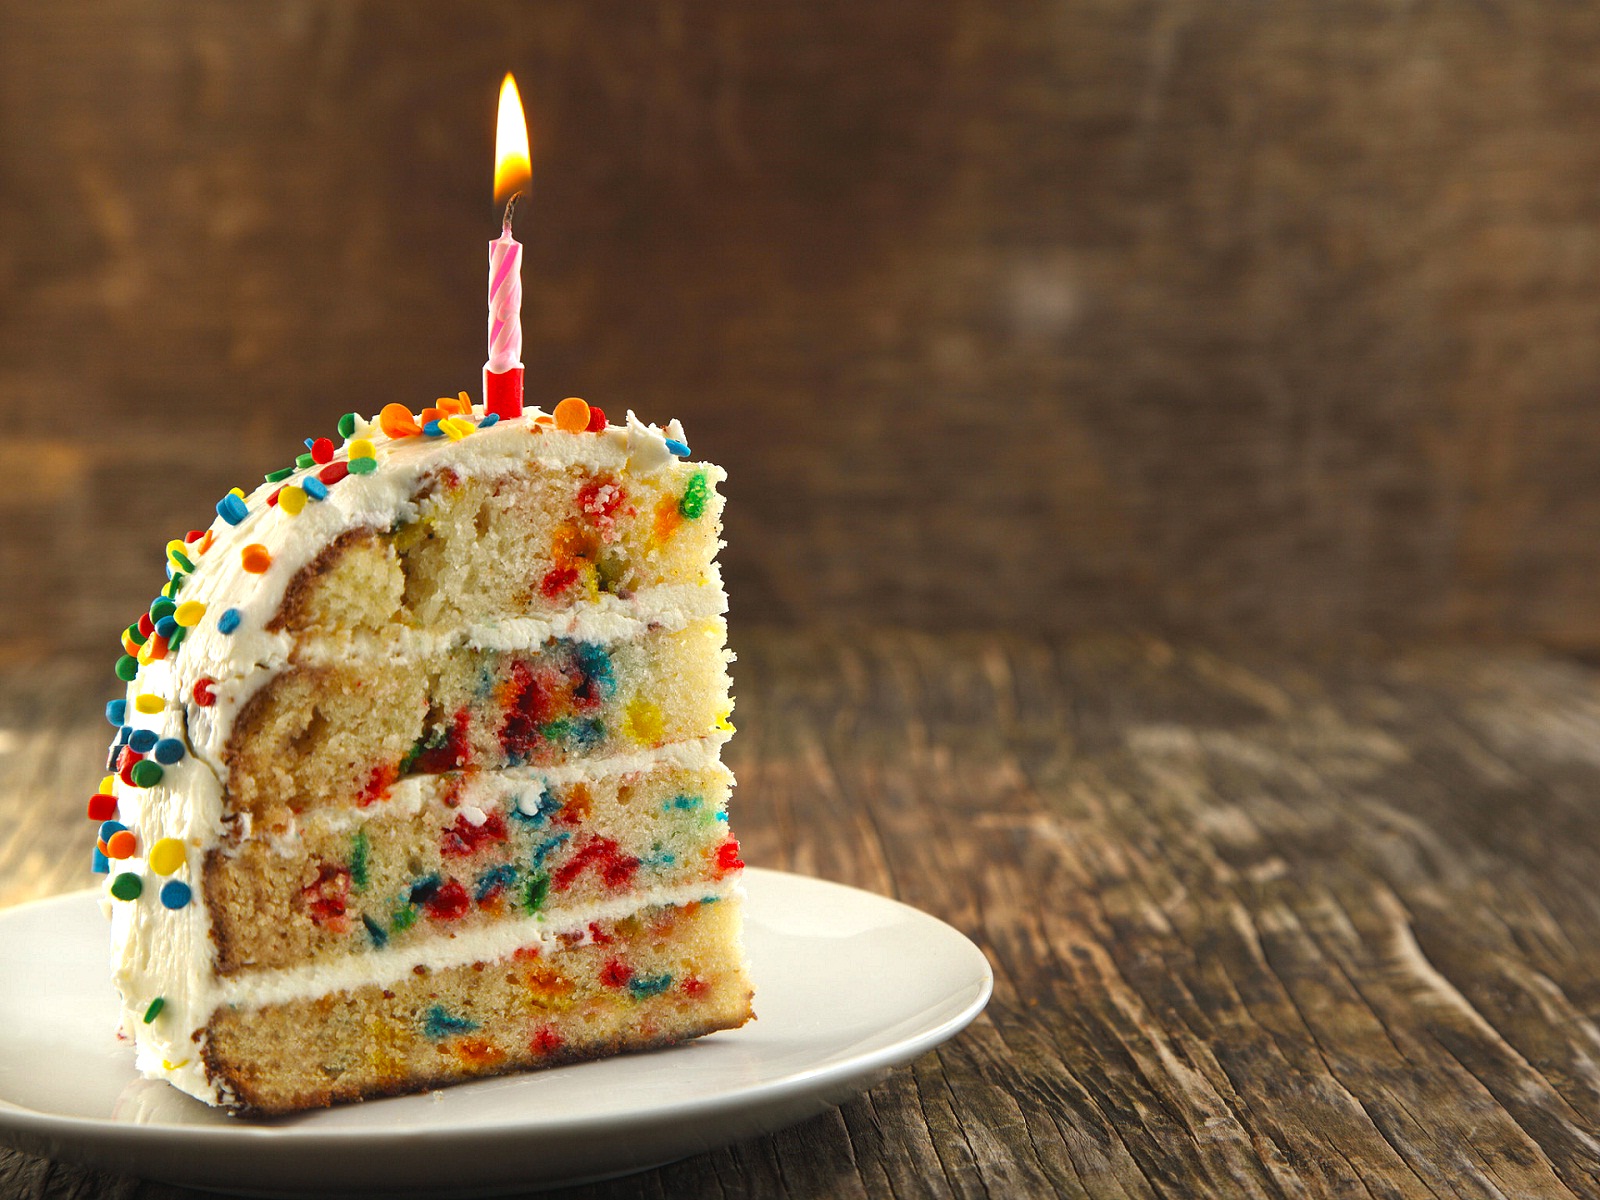 Top 10 : Special Unique Happy Birthday Cake HD Pics Images for Lover | J u  s t q u i k r… | Happy birthday cakes, Happy birthday cake hd, Happy birthday  cake images